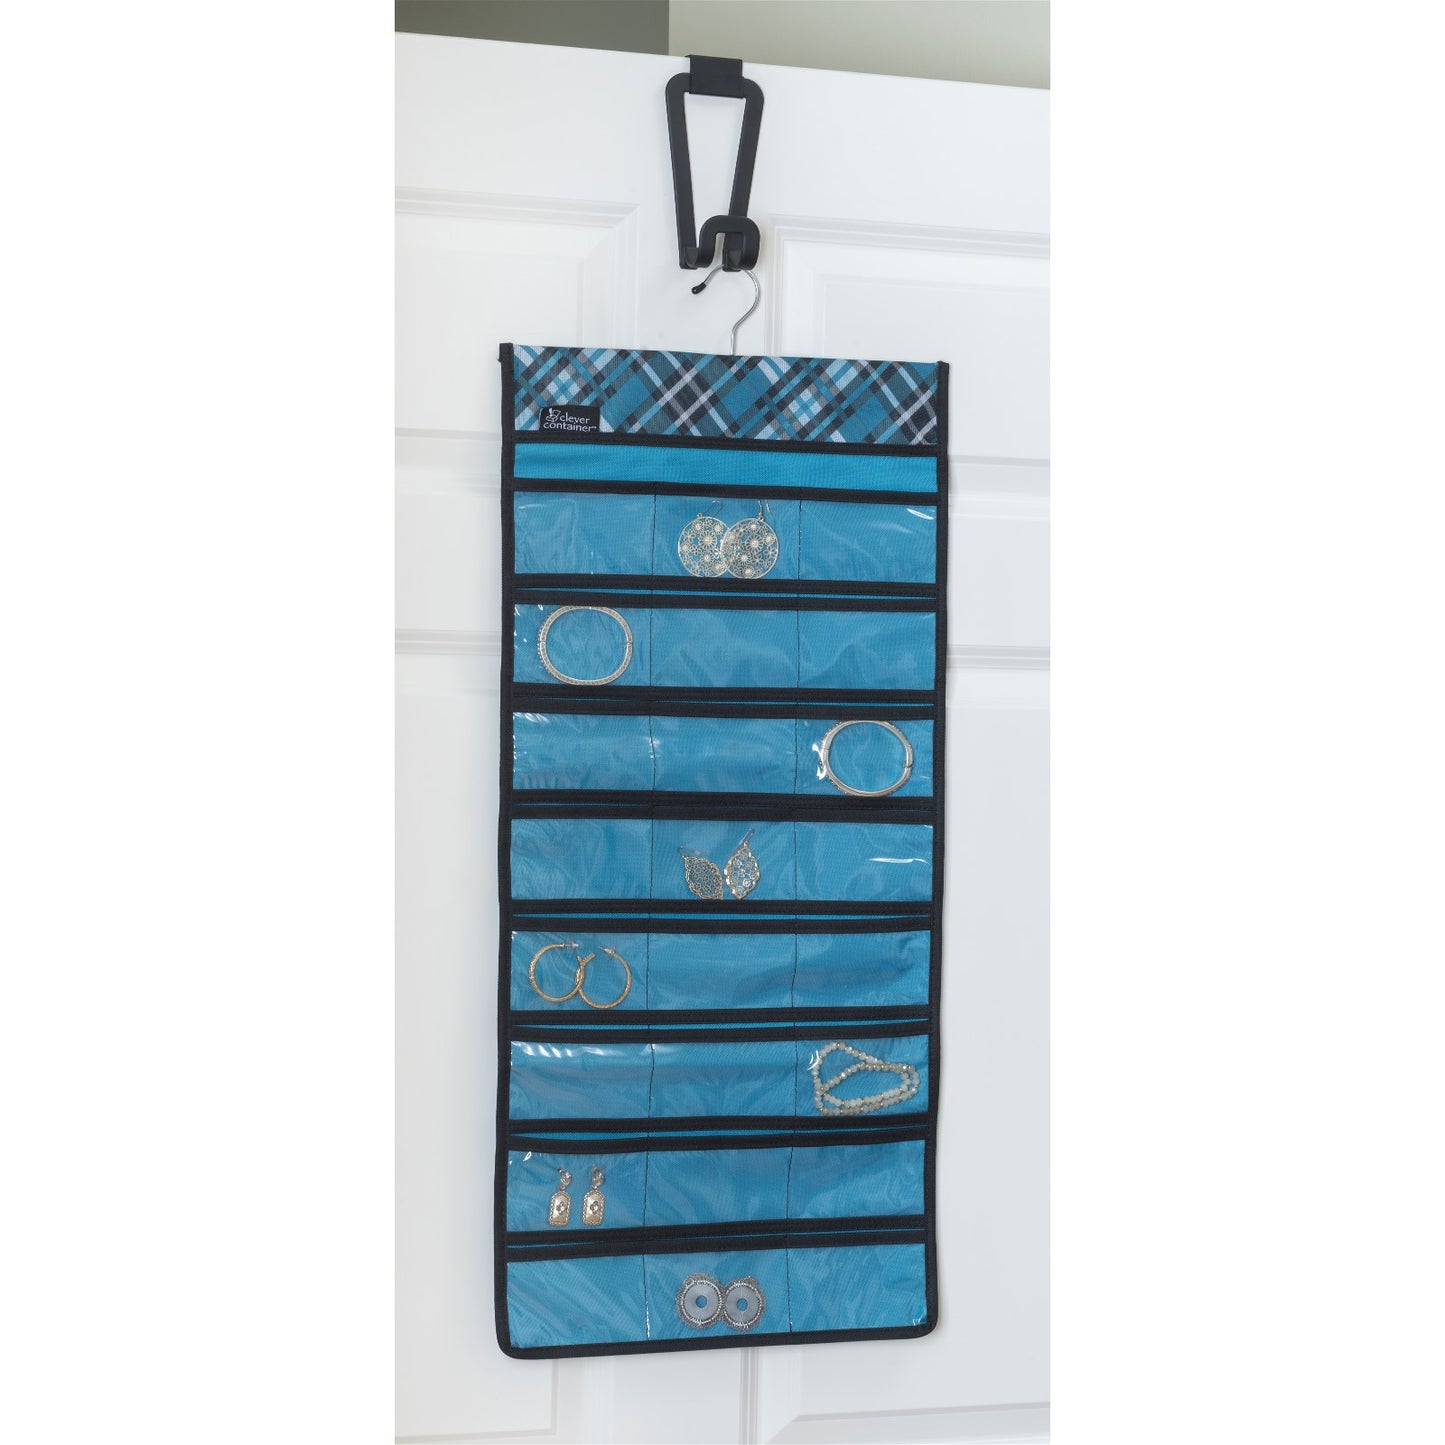 Jewelry Cubby - Teal Plaid